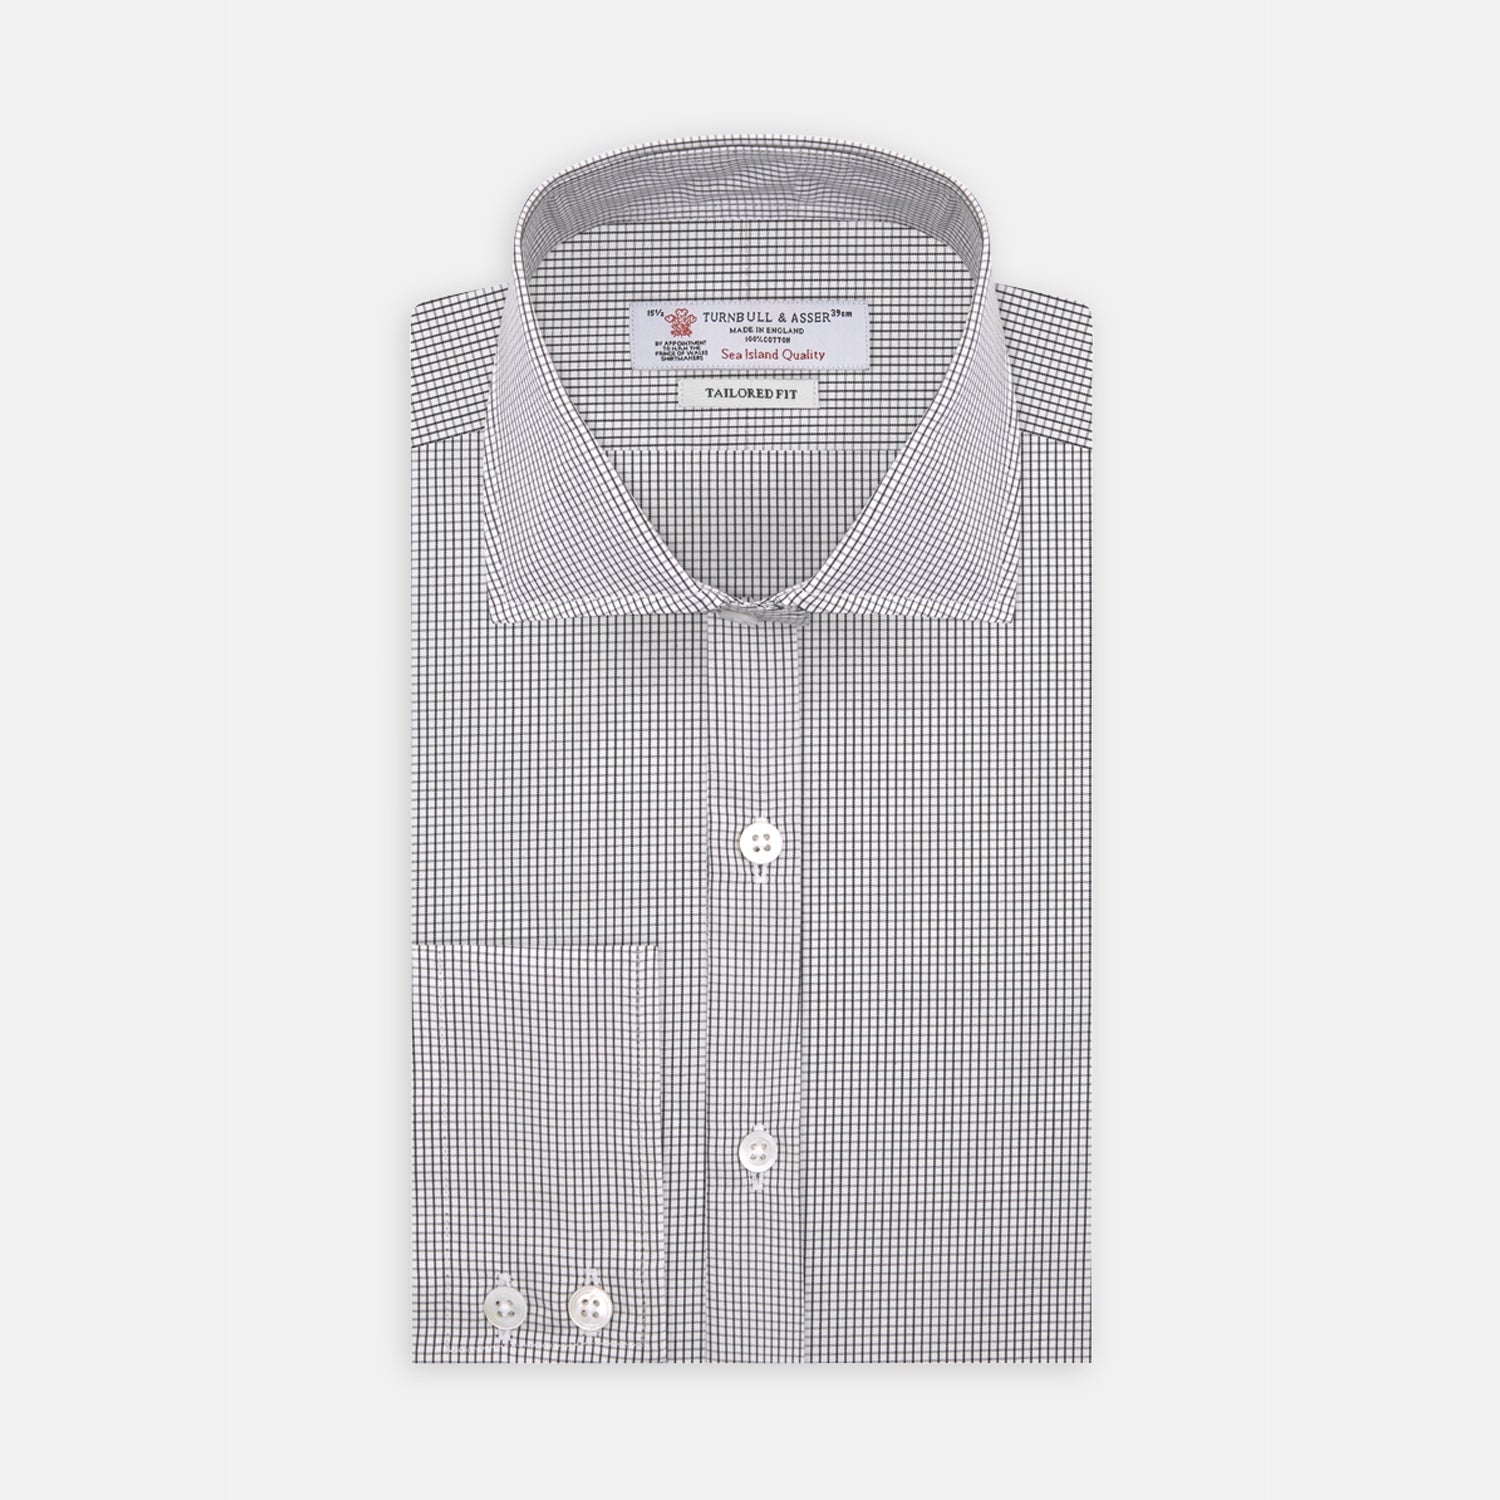 Tailored Fit Grey and White Small Check Shirt with Kent Collar and 2-Button Cuffs